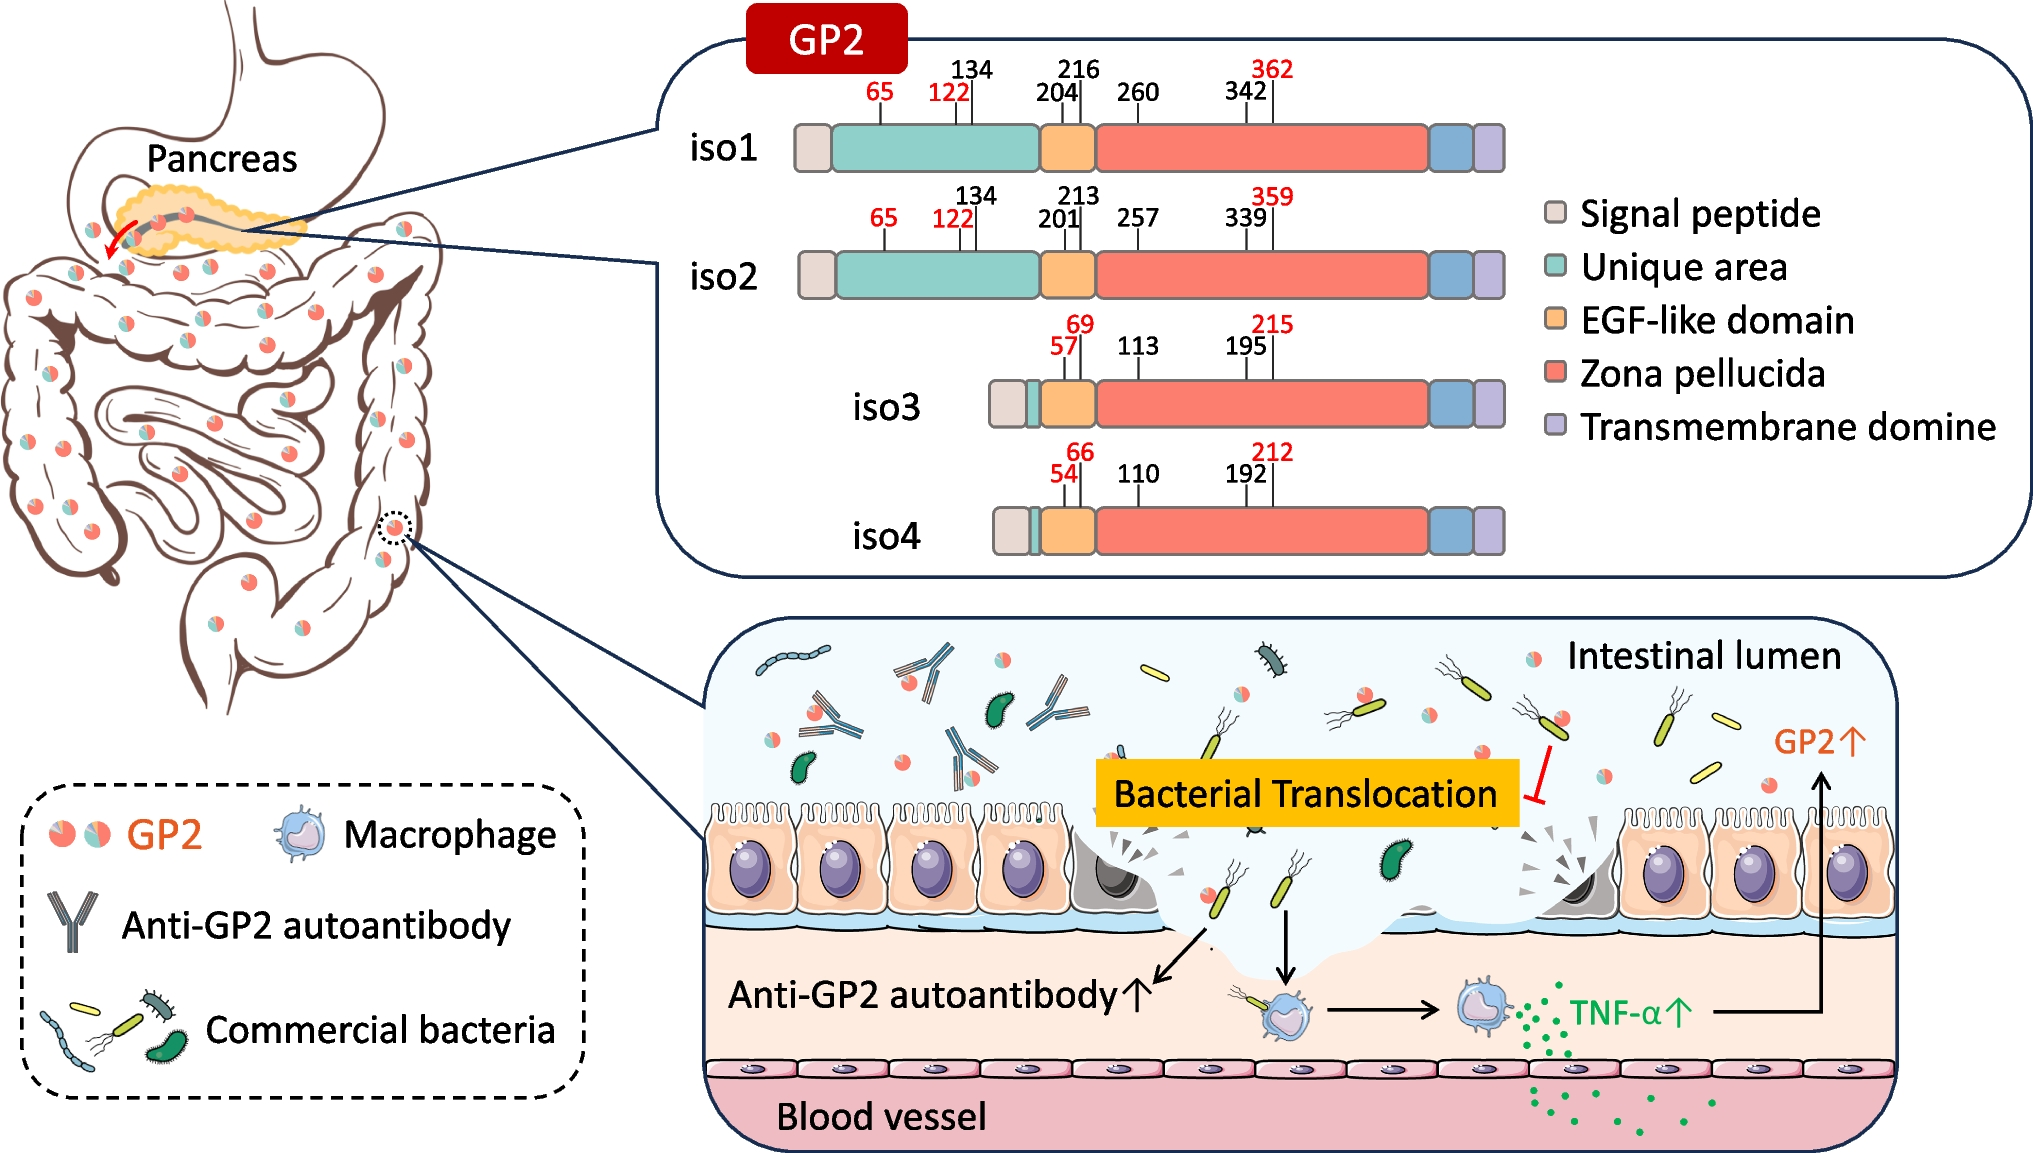 Glycoprotein 2 as a gut gate keeper for mucosal equilibrium between inflammation and immunity